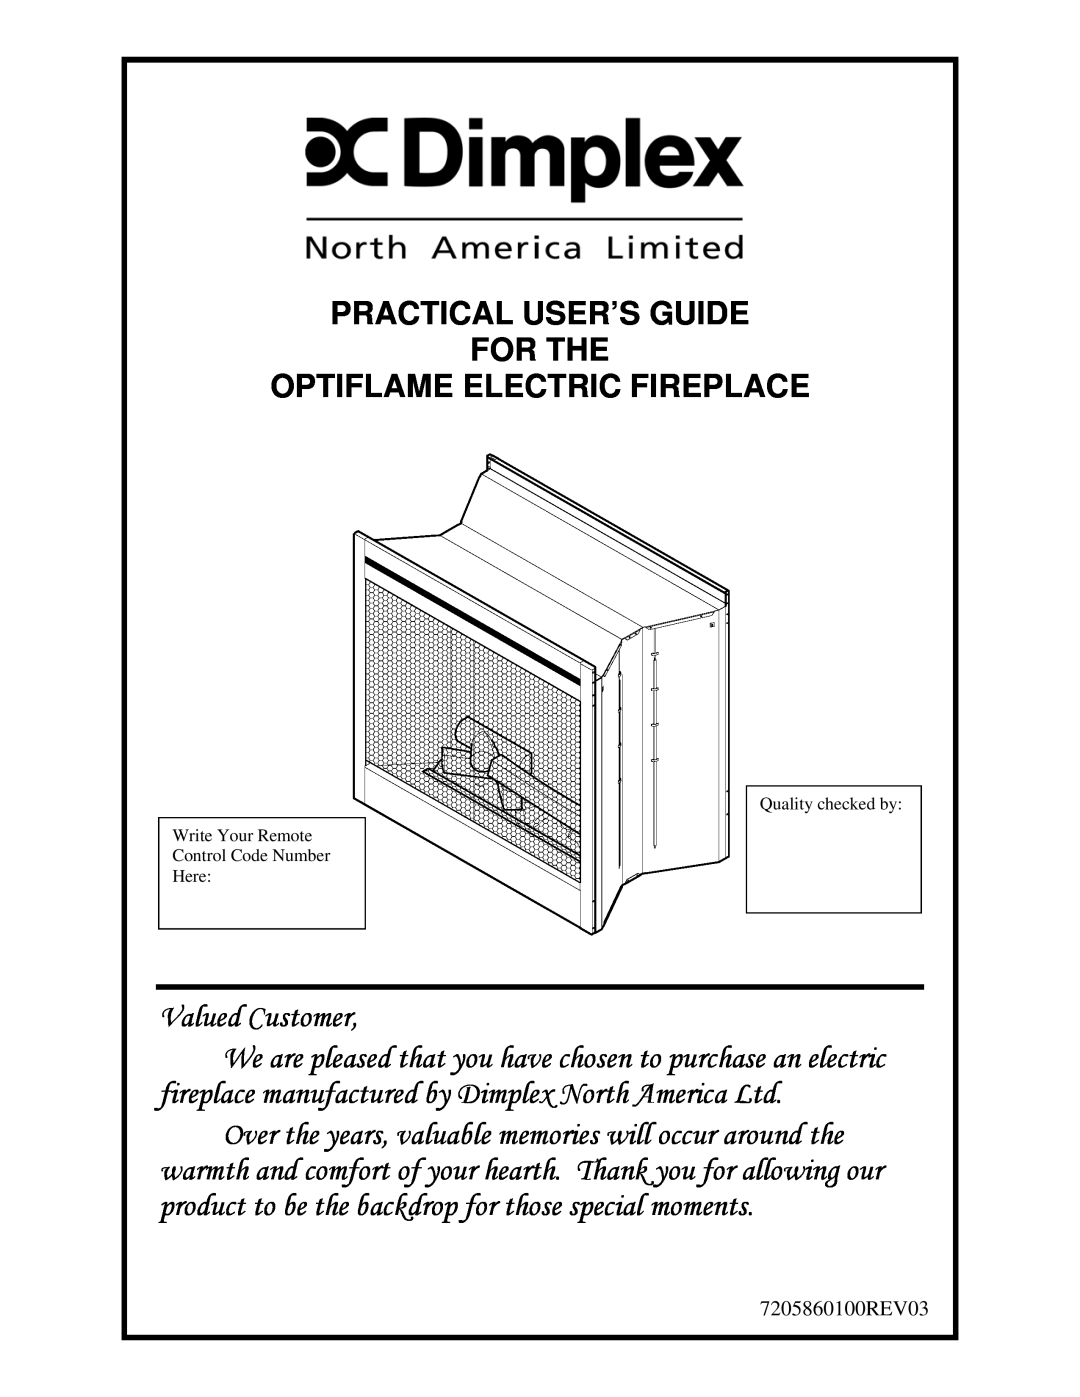 Dimplex Optiflame Electric Fireplace manual Practical User’S Guide For The 